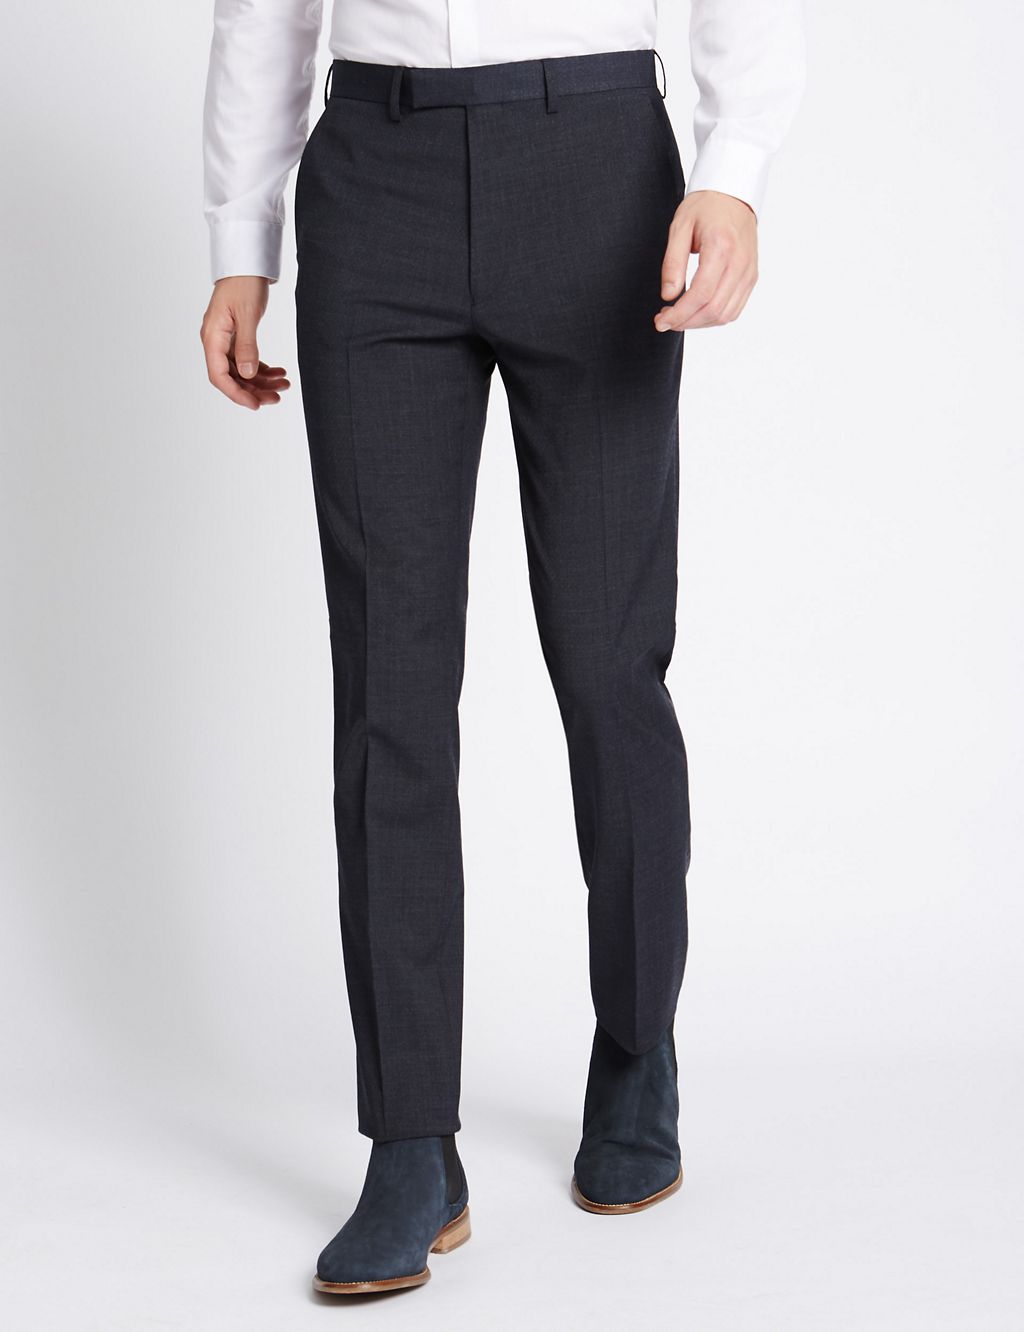 Charcoal Textured Modern Slim Fit Trousers 3 of 4